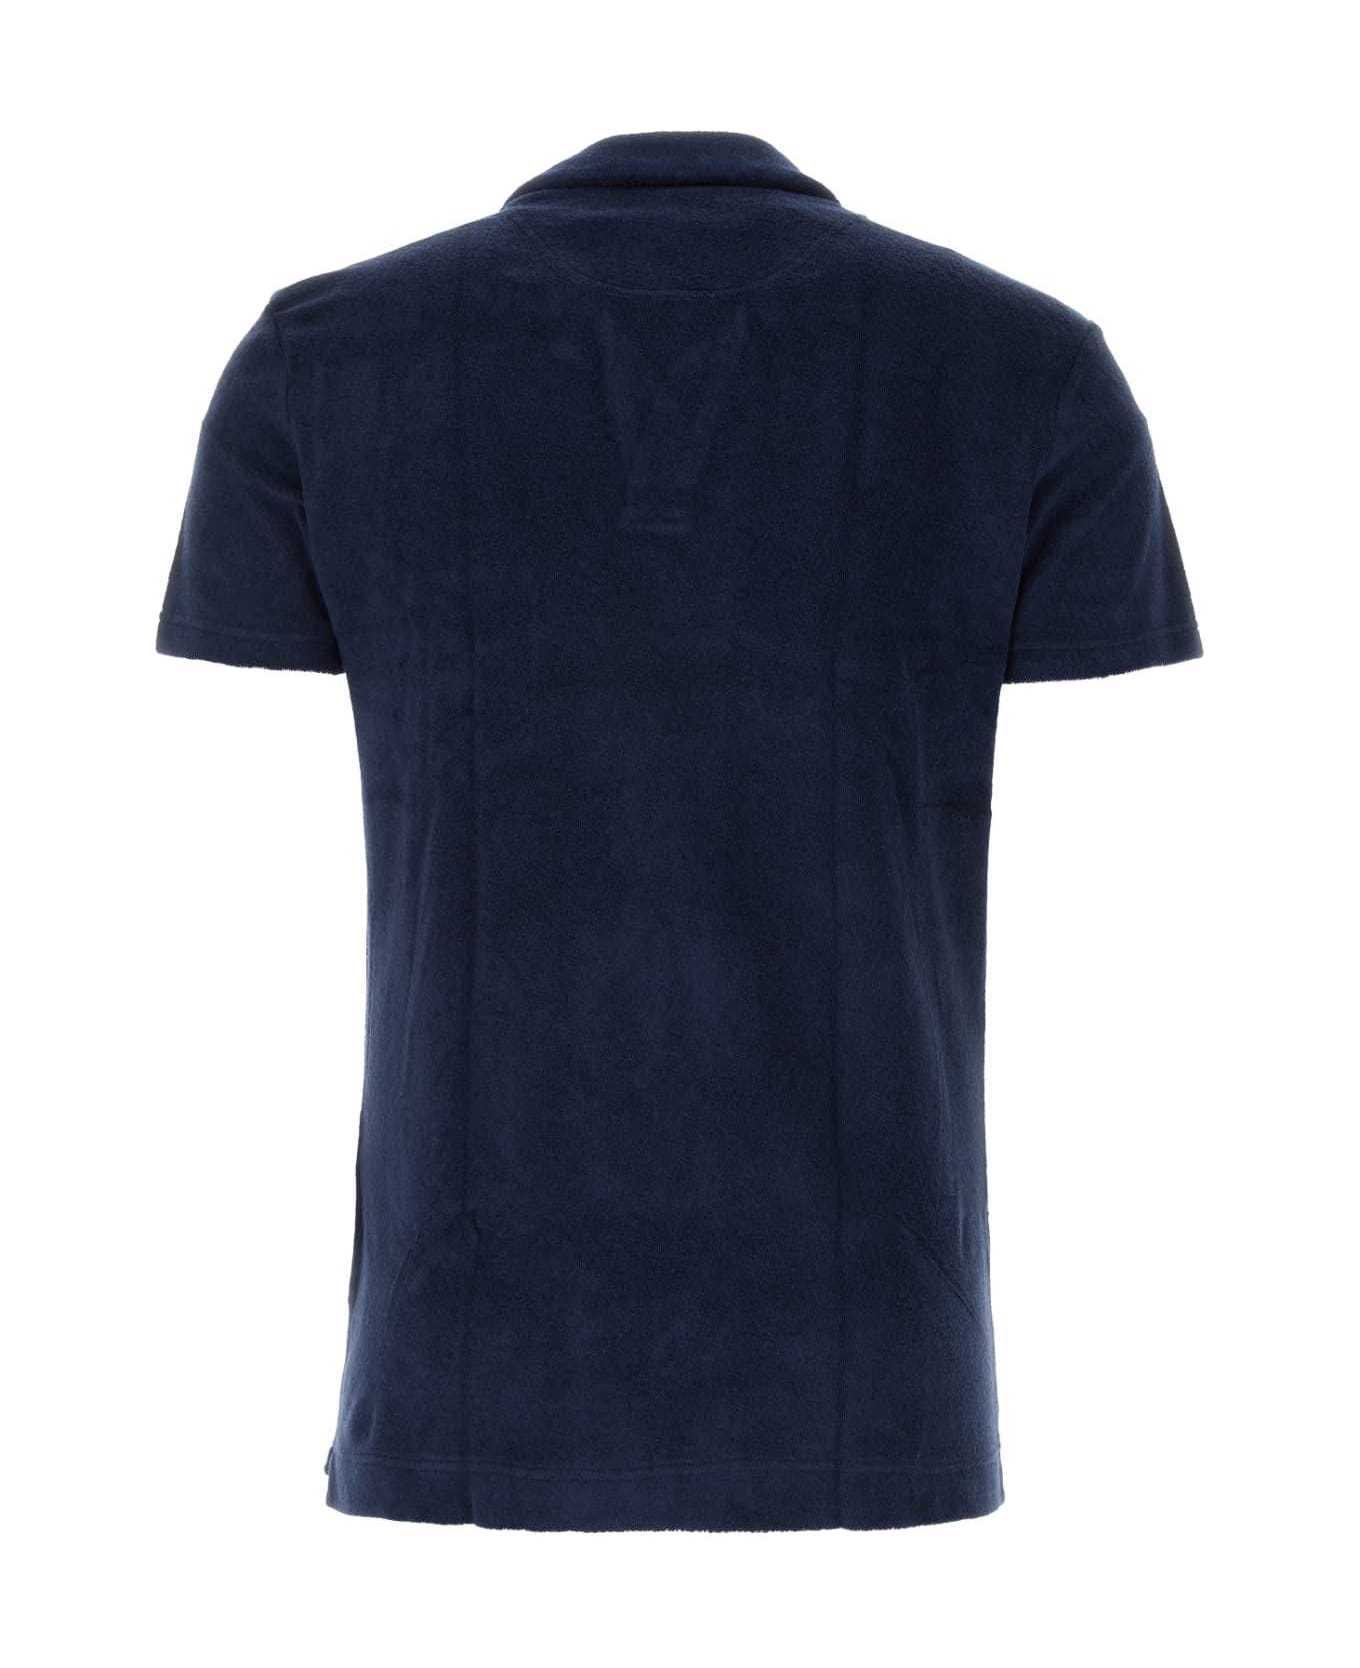 Orlebar Brown Navy Blue Terry Fabric Terry Polo Shirt - NAVY ポロシャツ